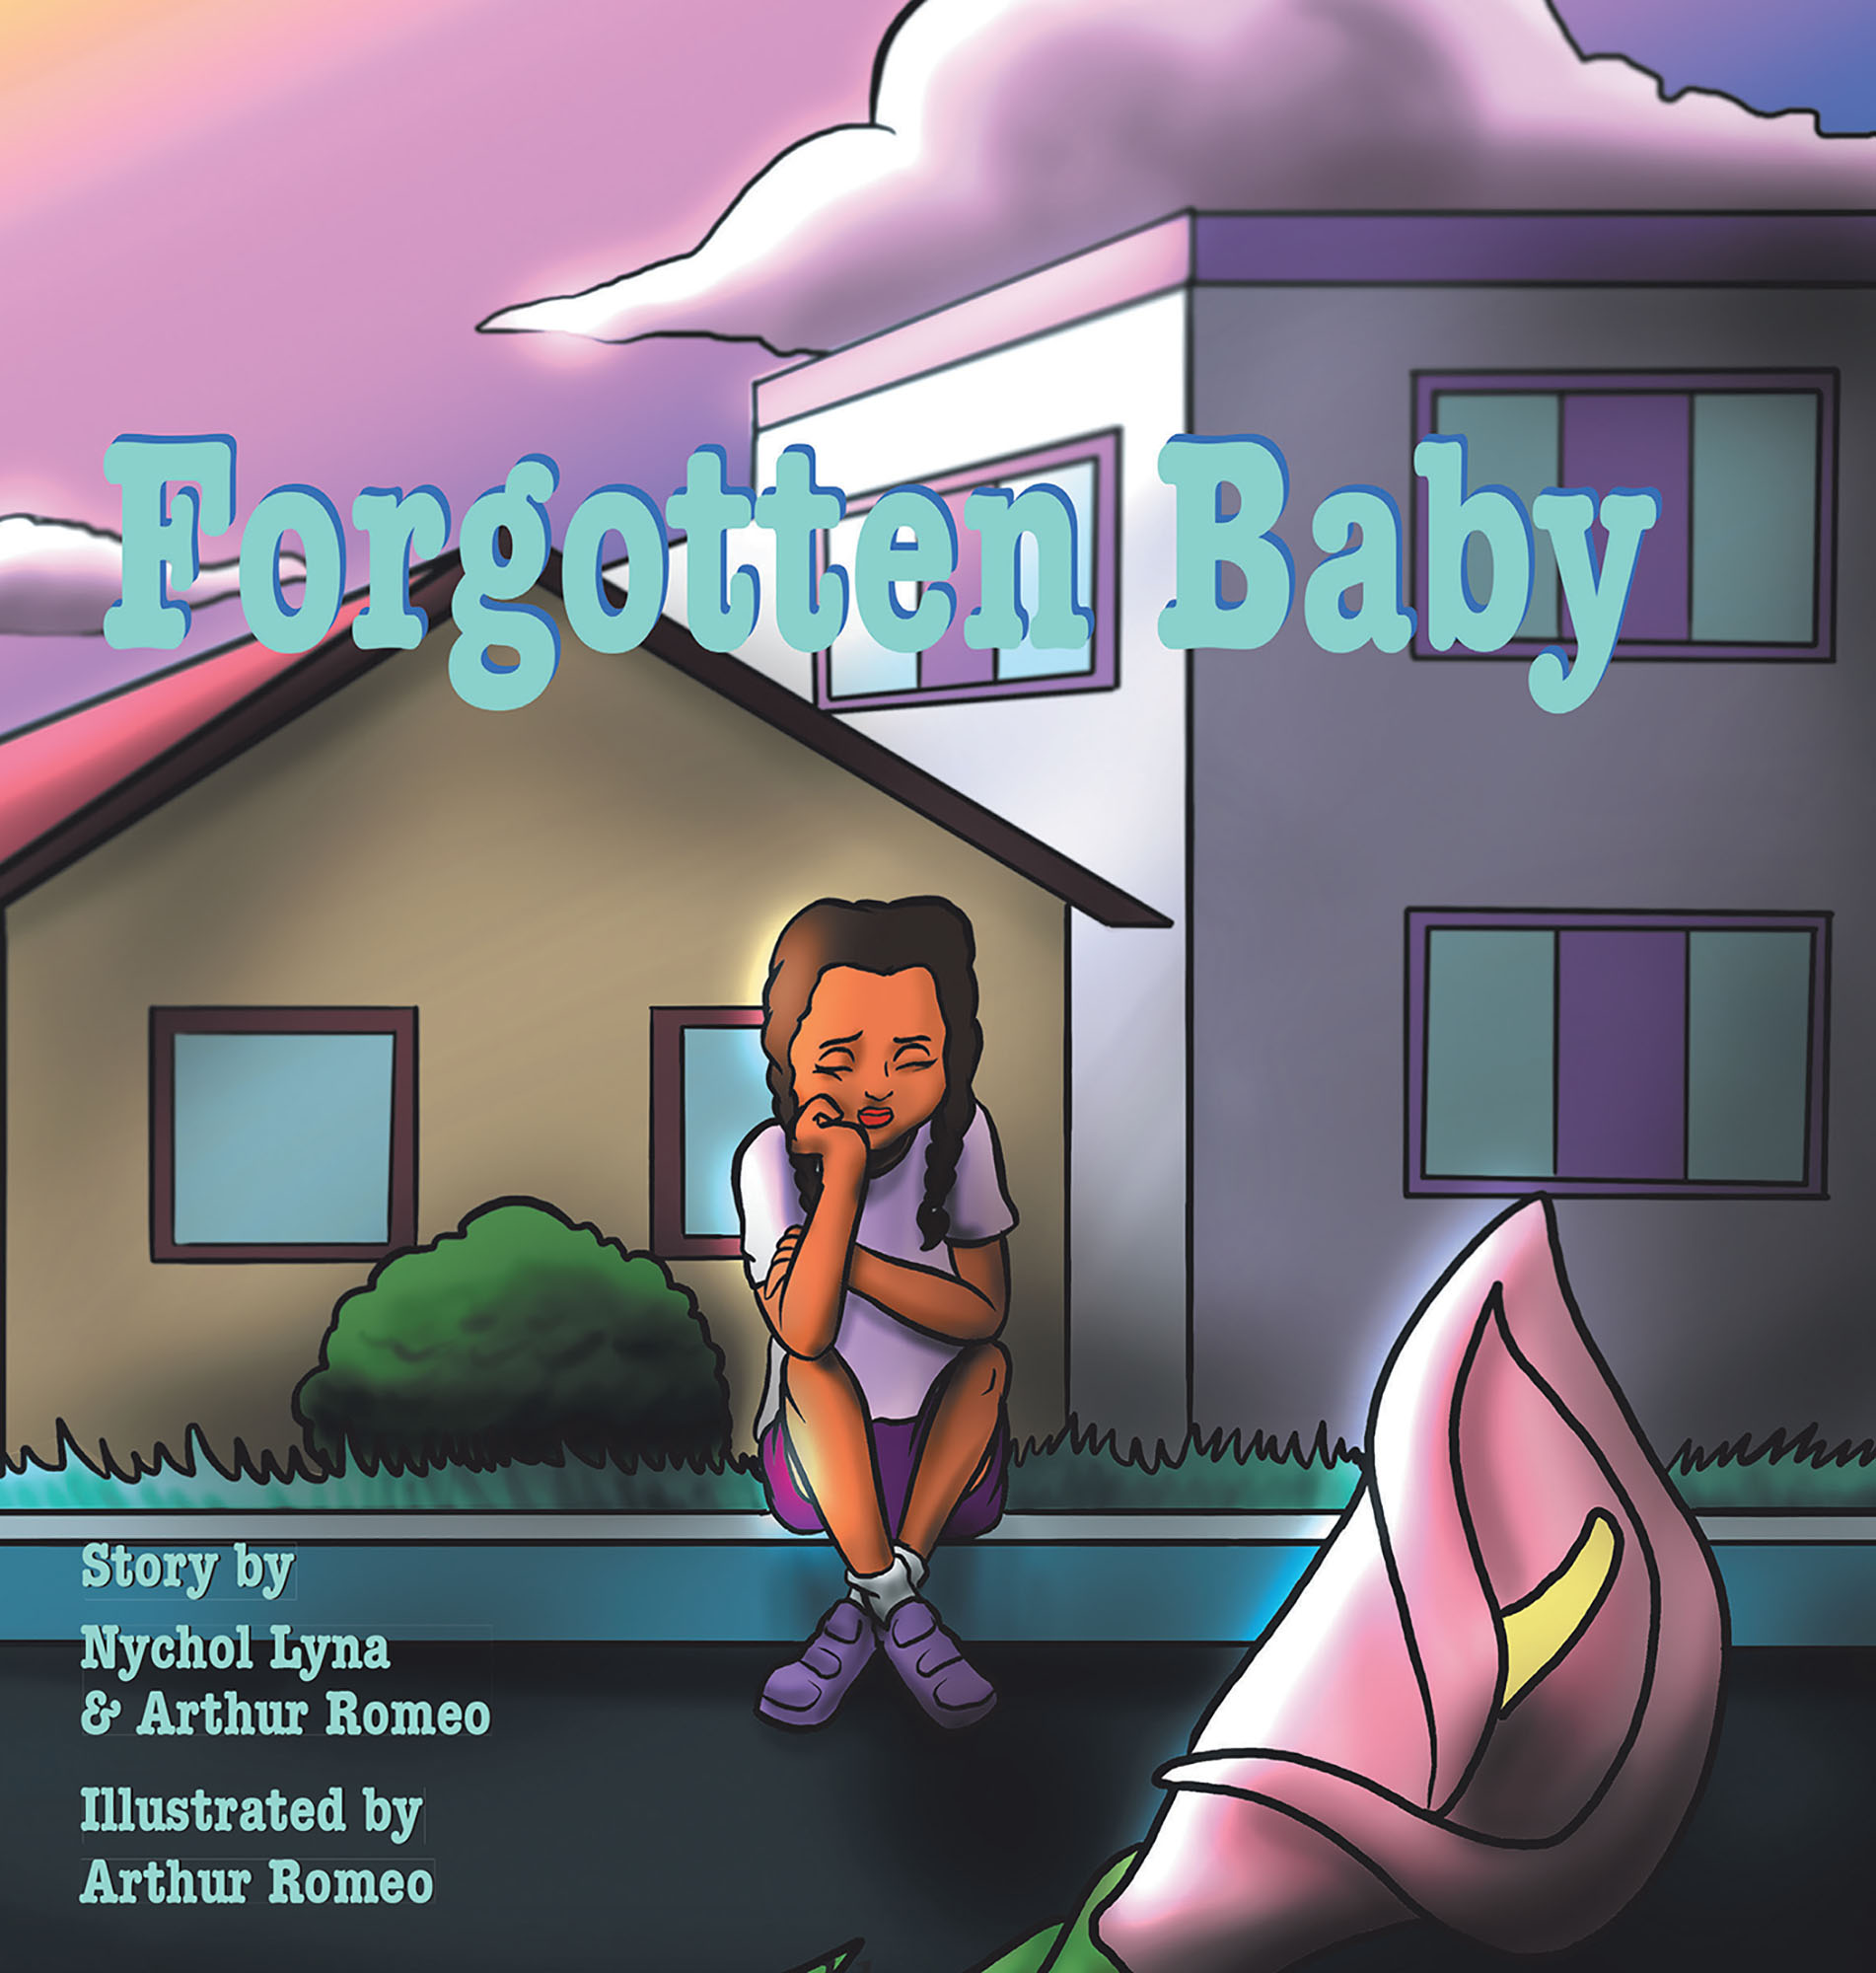 author nychol lyna"s new book "forgotten baby" is